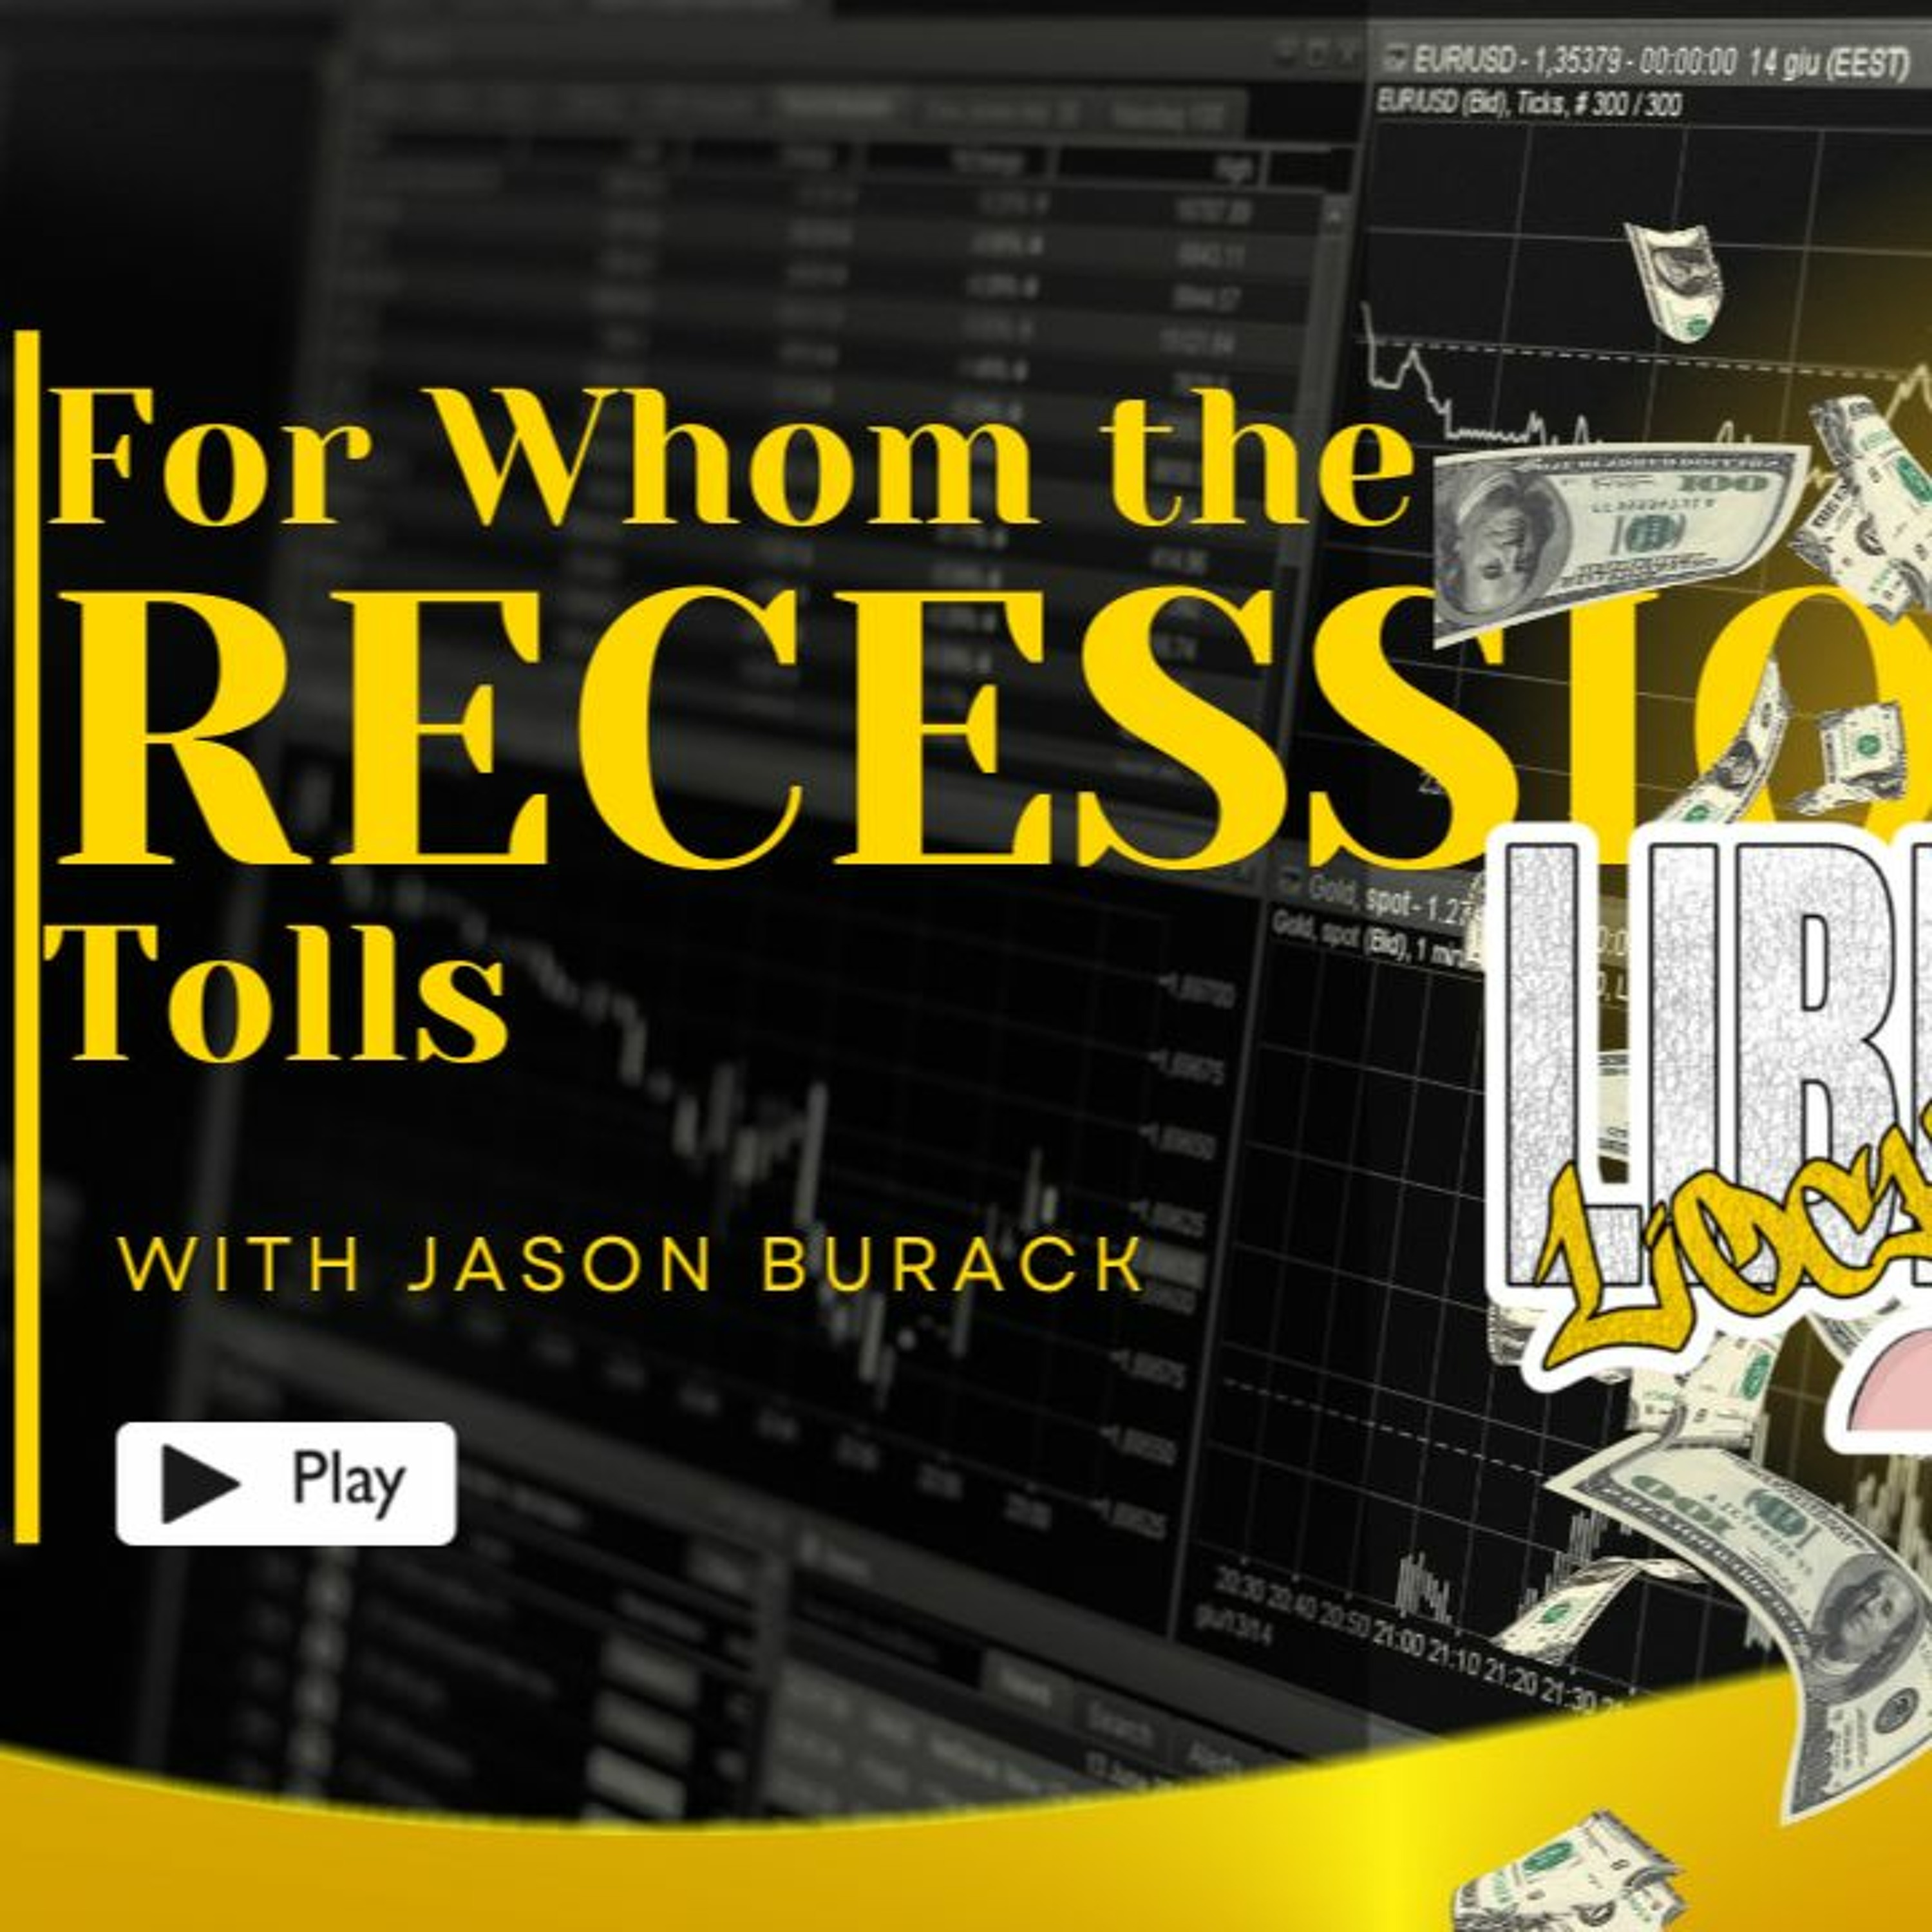 Ep 205 For Whom the Recession Tolls w/ Jason Burack